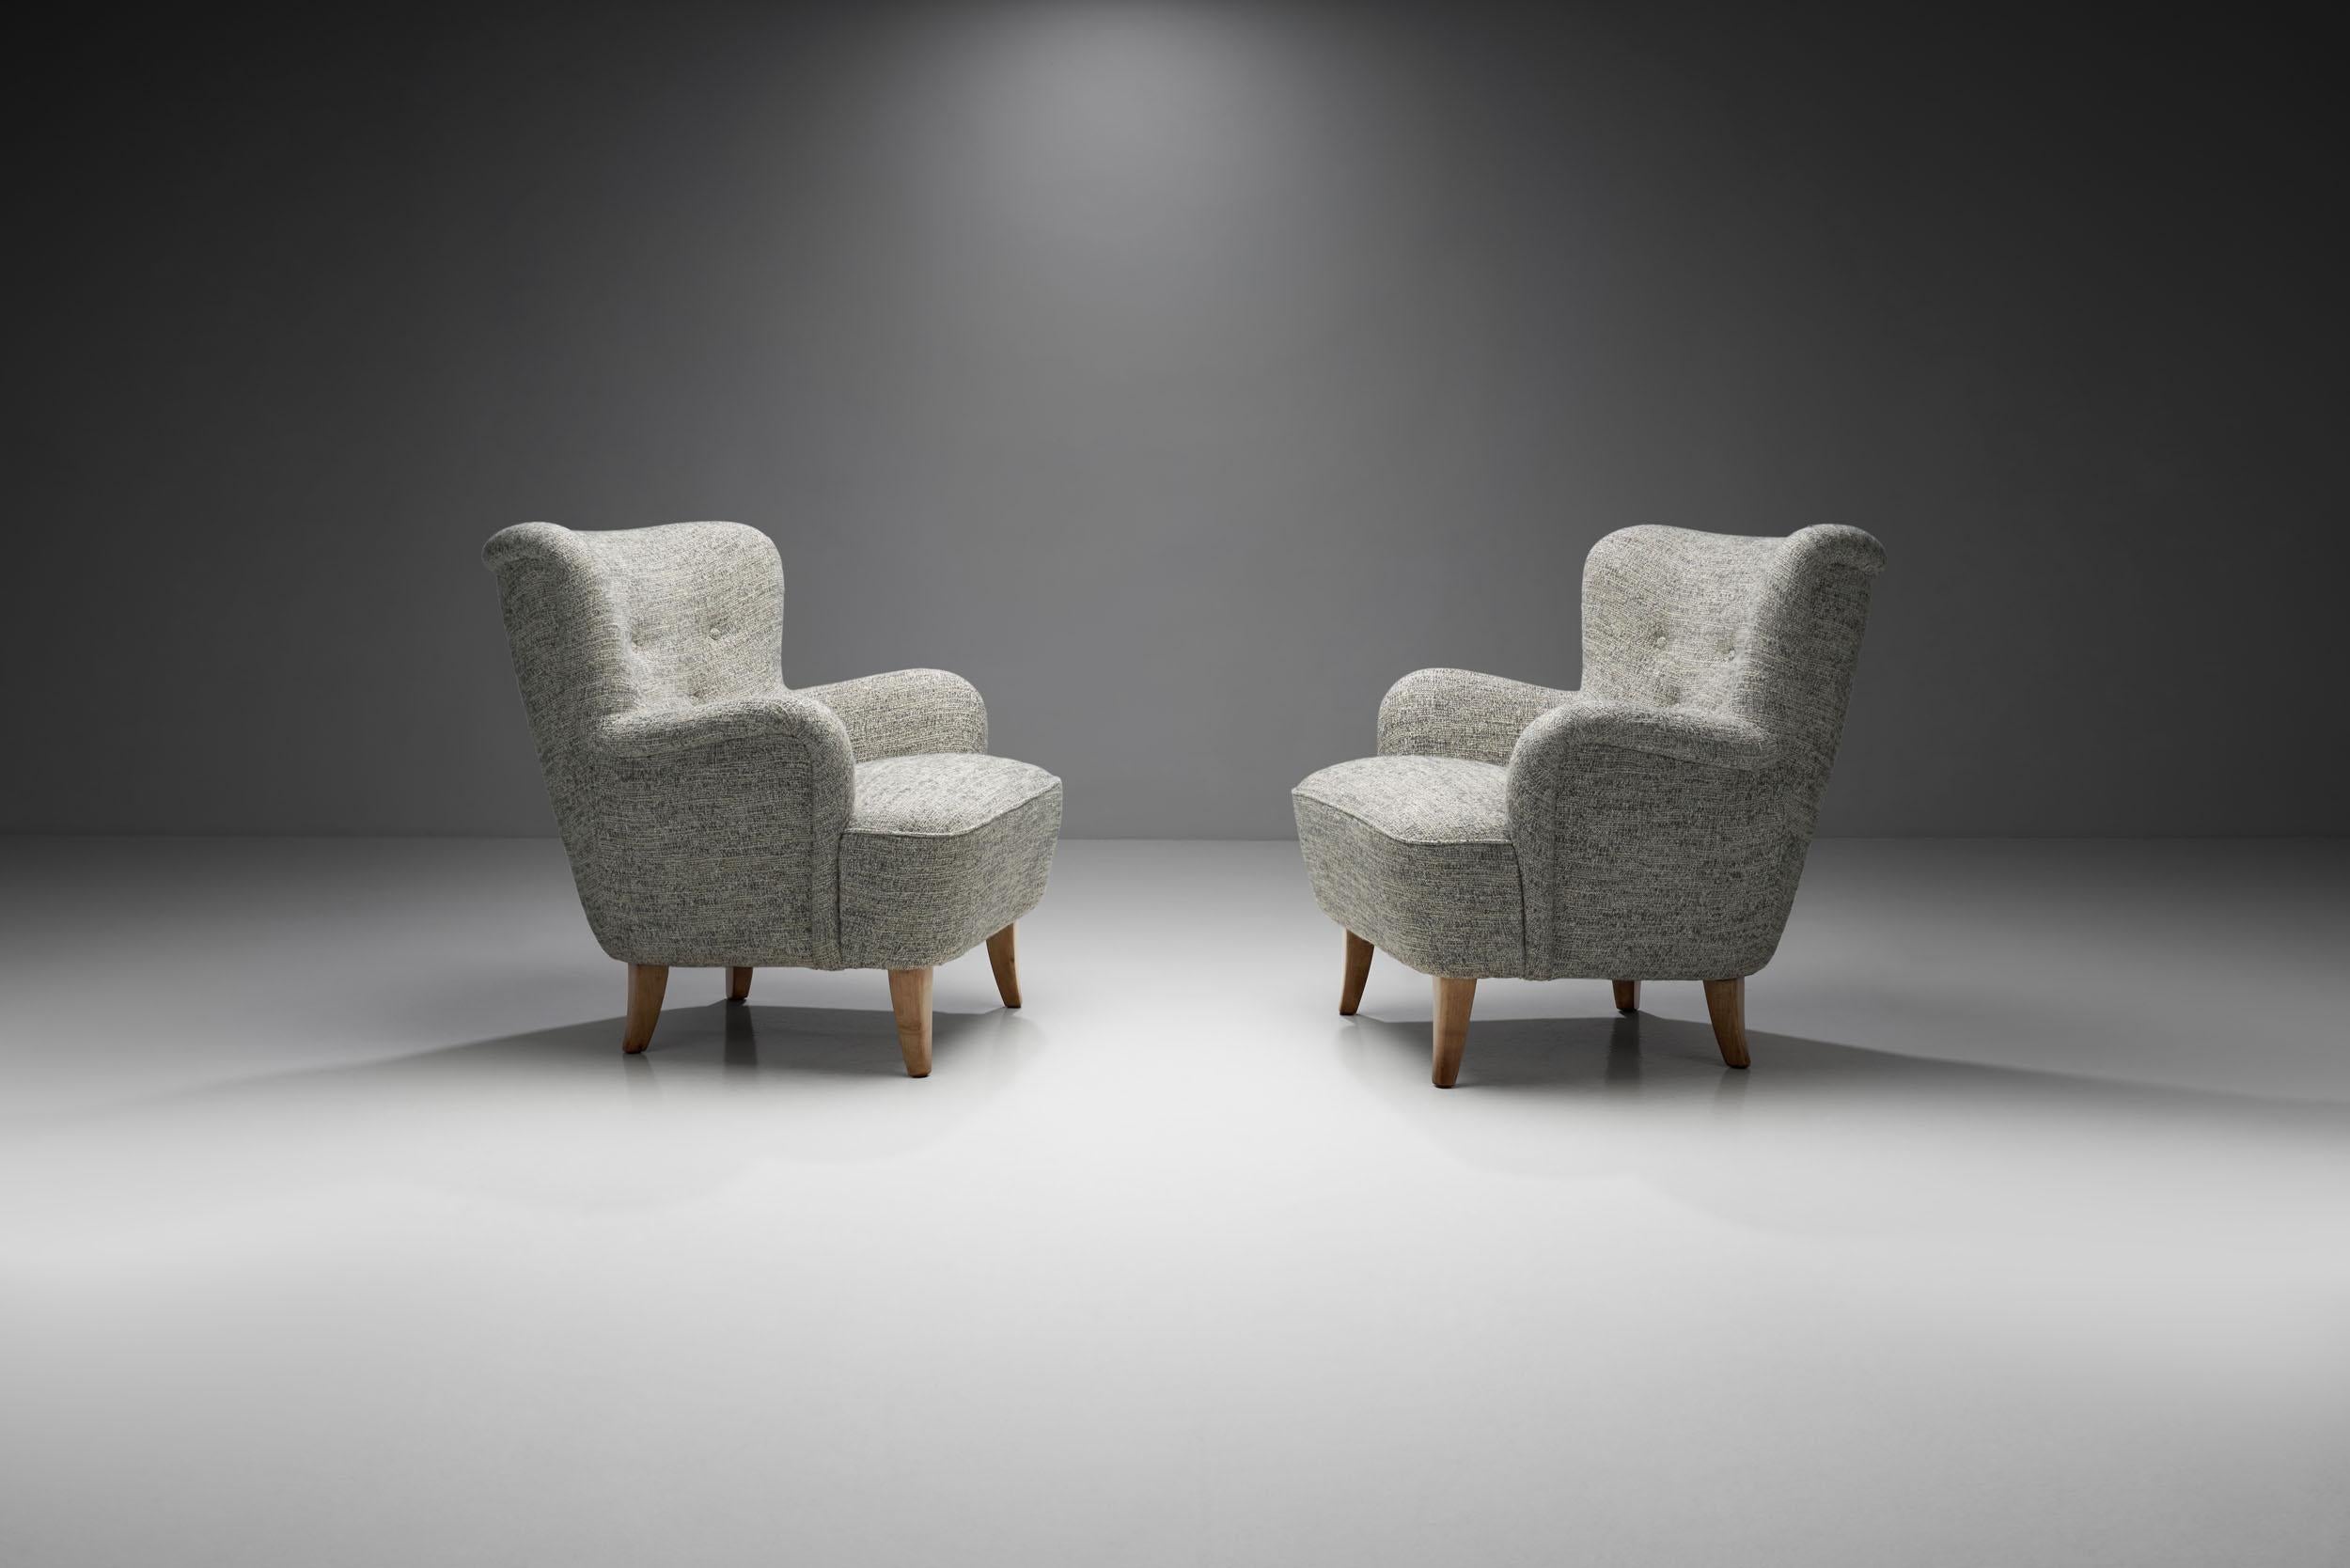 Pair of “Laila” Armchairs by Ilmari Lappalainen for Asko, Finland, 1948 In Good Condition For Sale In Utrecht, NL